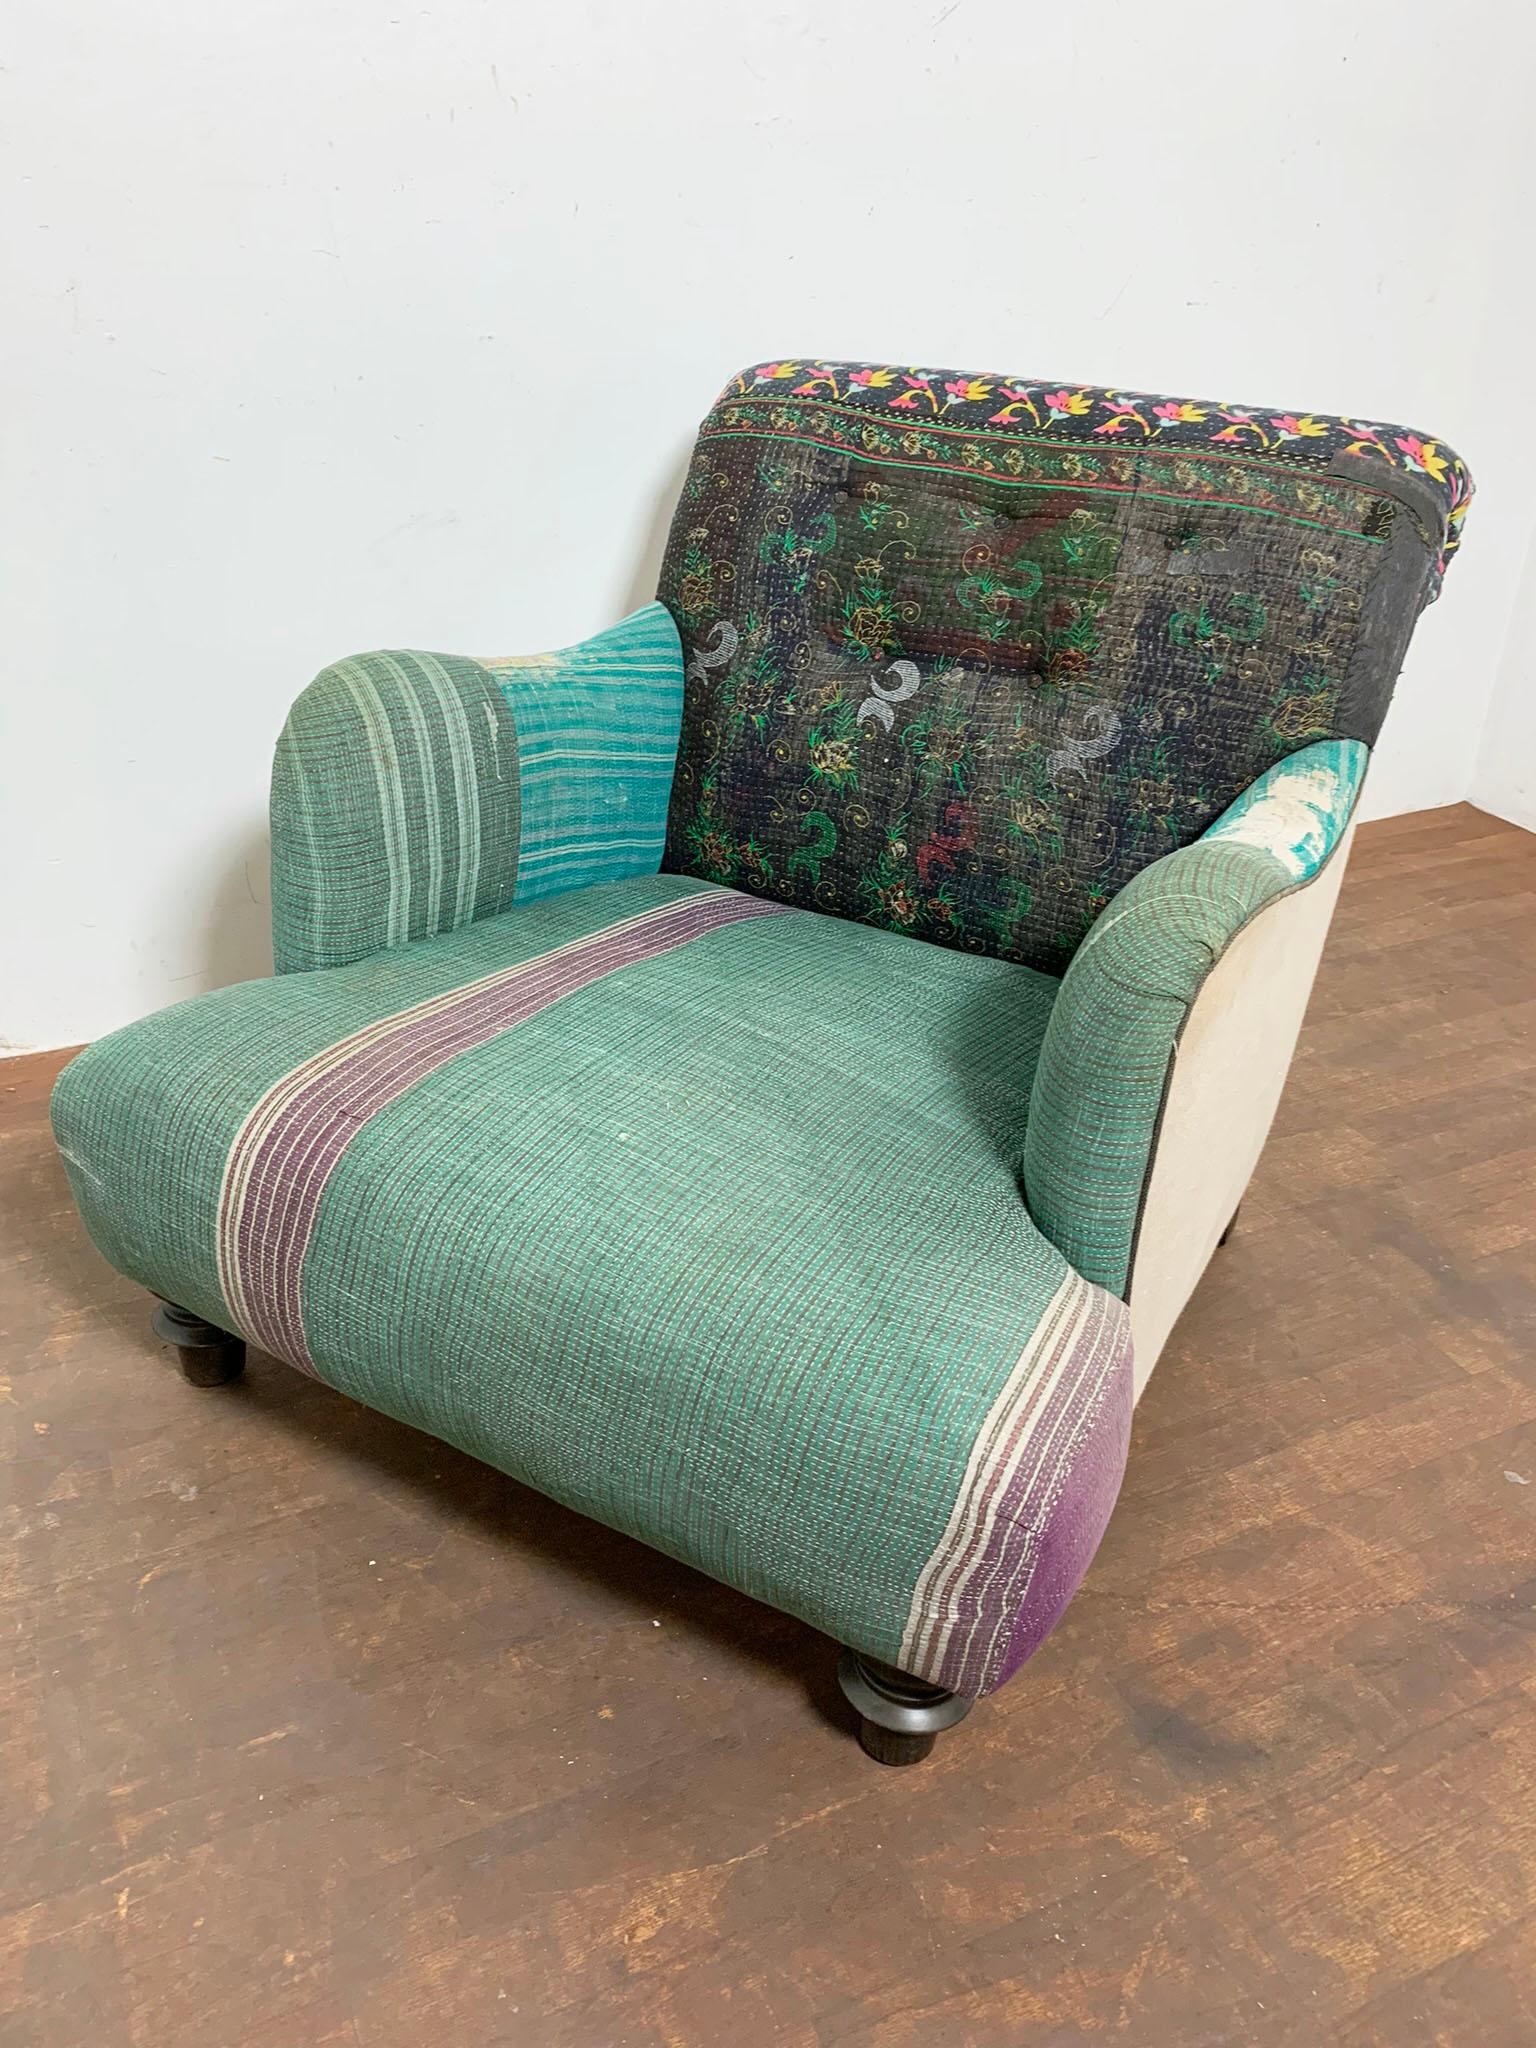 A one-of-a-kind Acacia chair by Cisco Brothers, upholstered in antique Bengali kantha quilts.